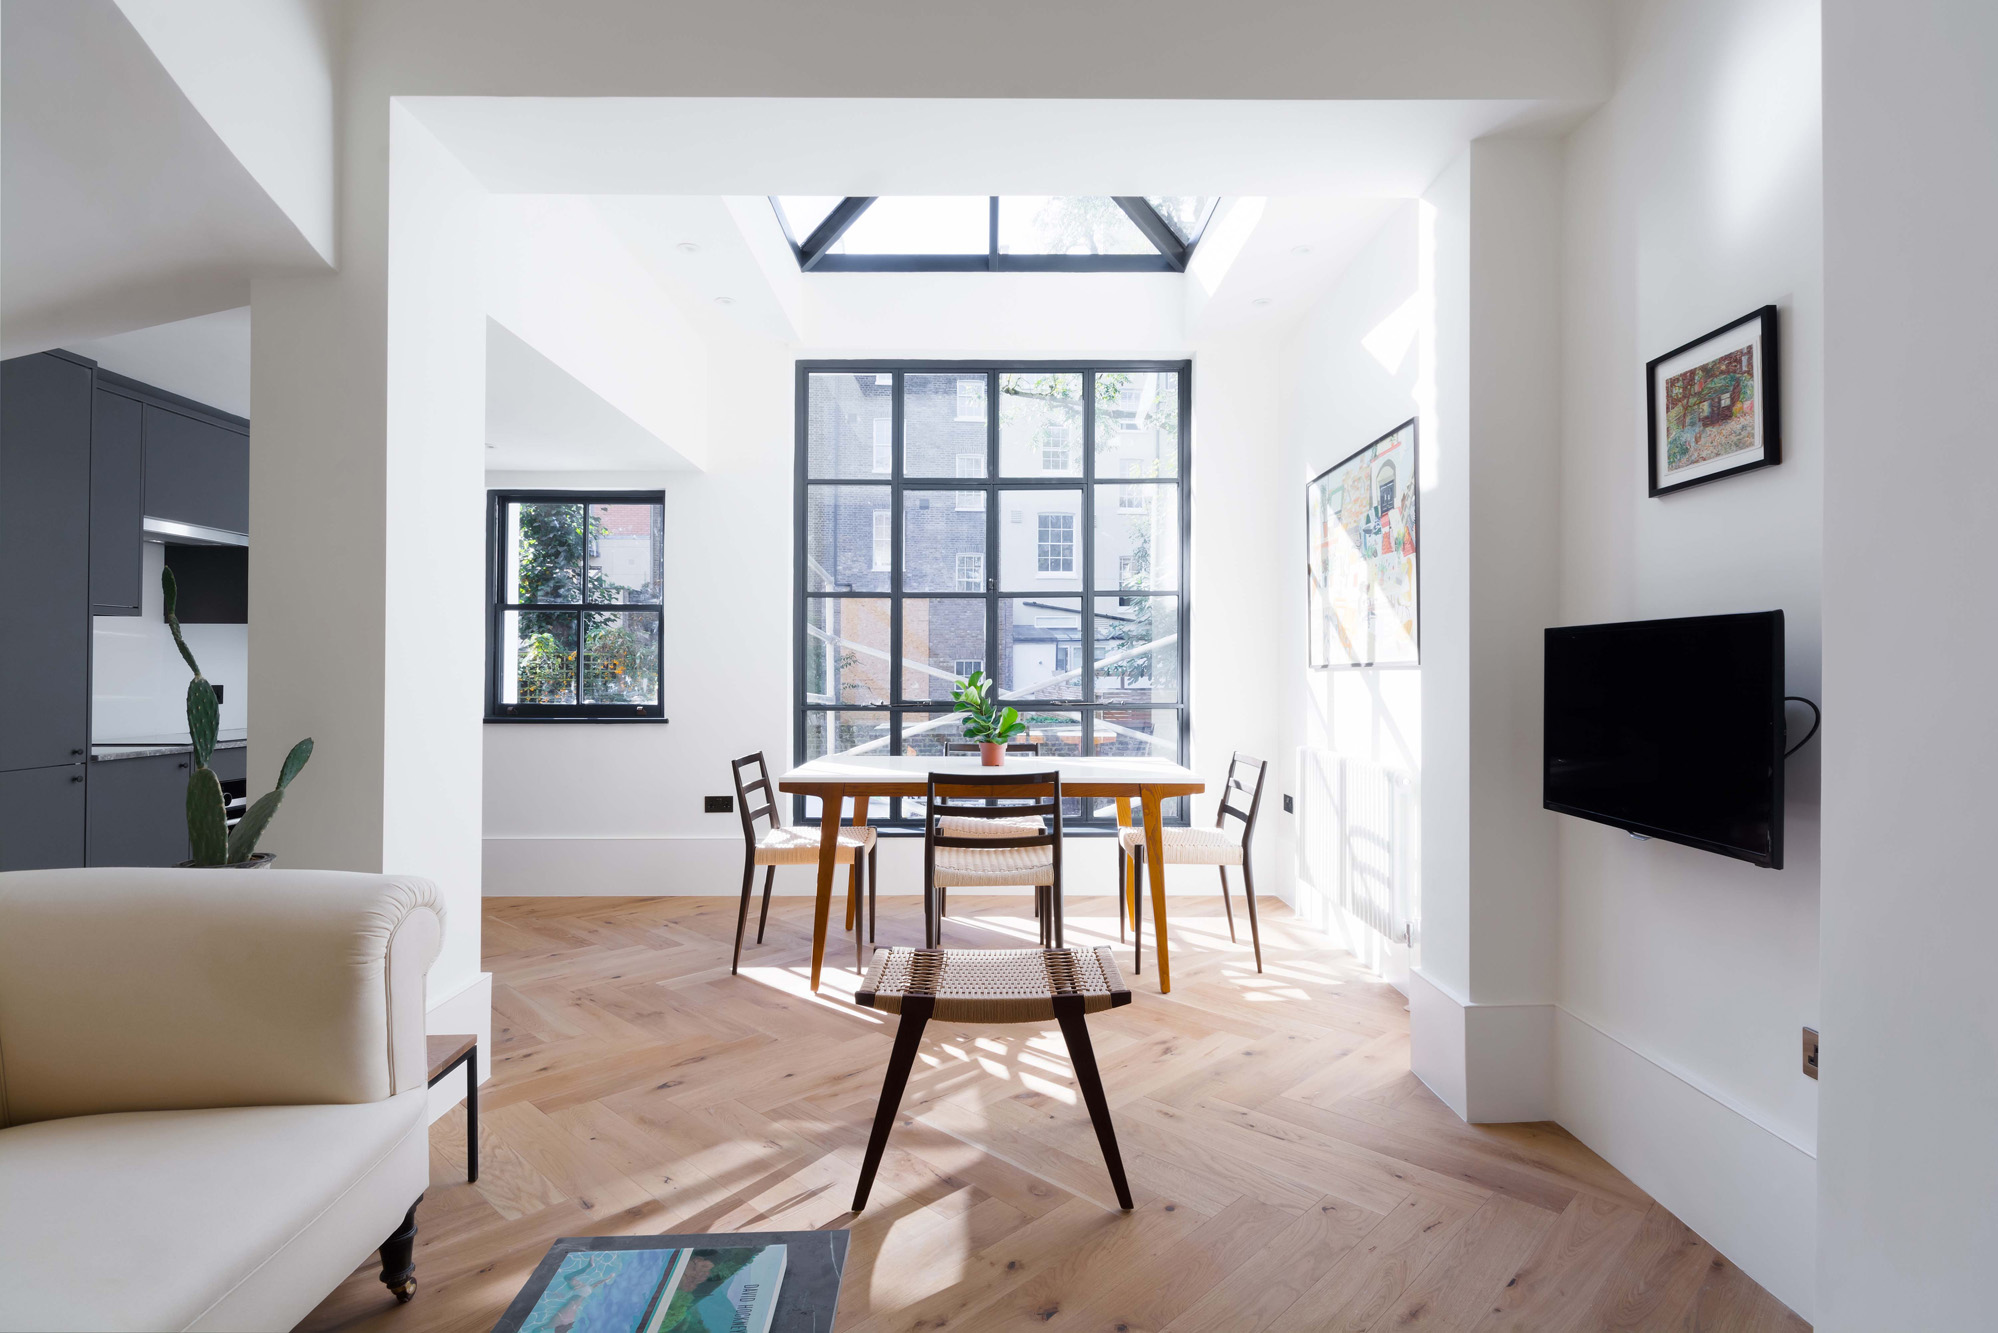 For Sale Artesian Road Notting Hill W2 contemporary reception room with Crittall windows